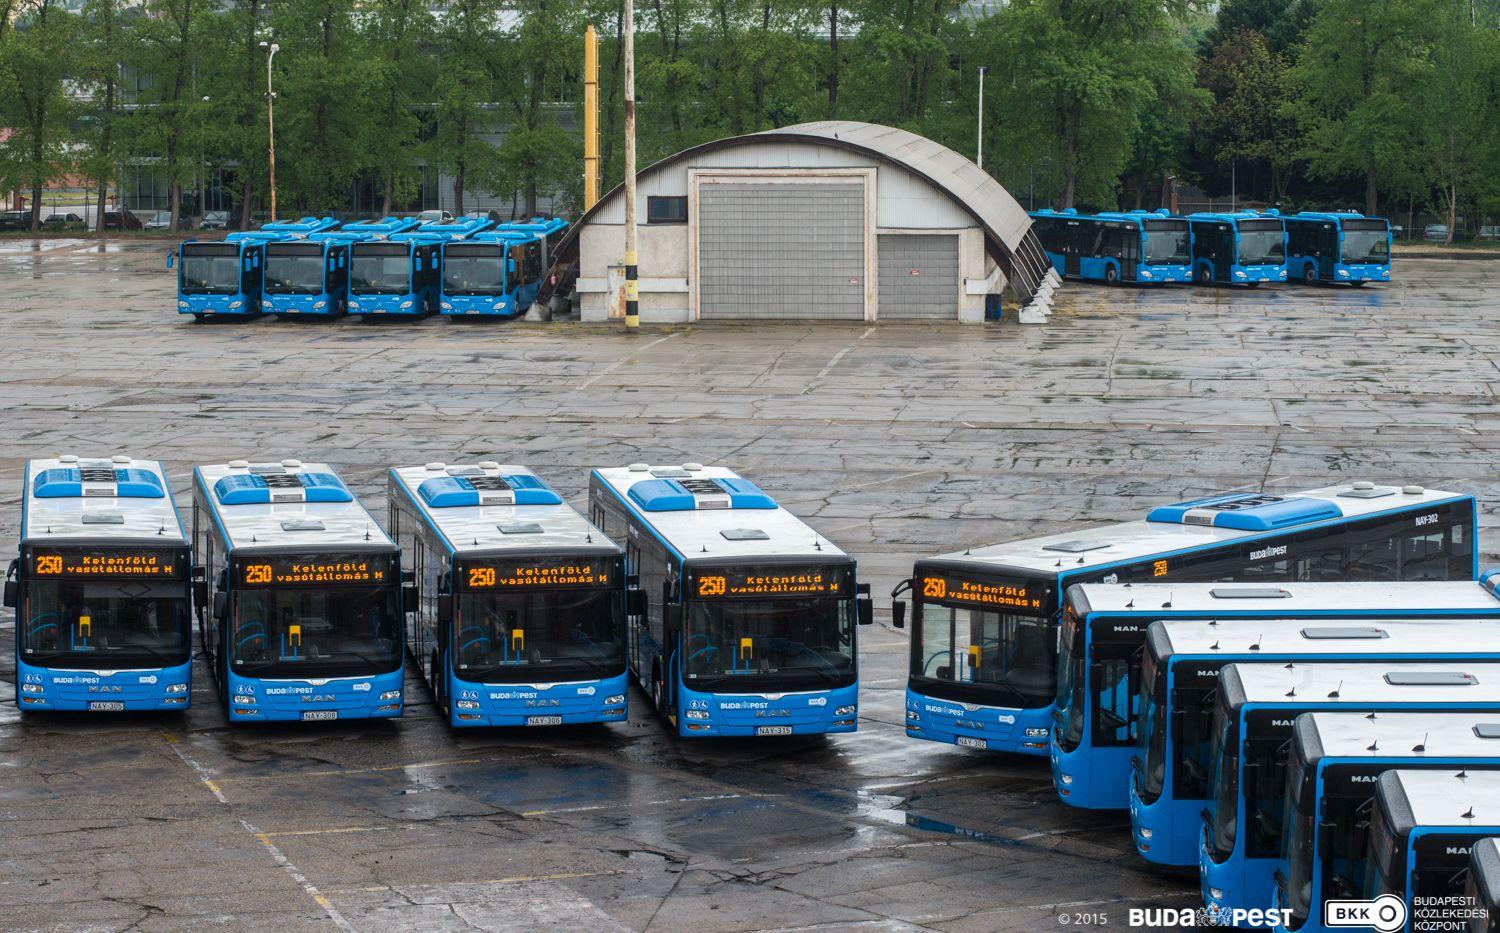 Budapest Bus Drivers Begin Protest